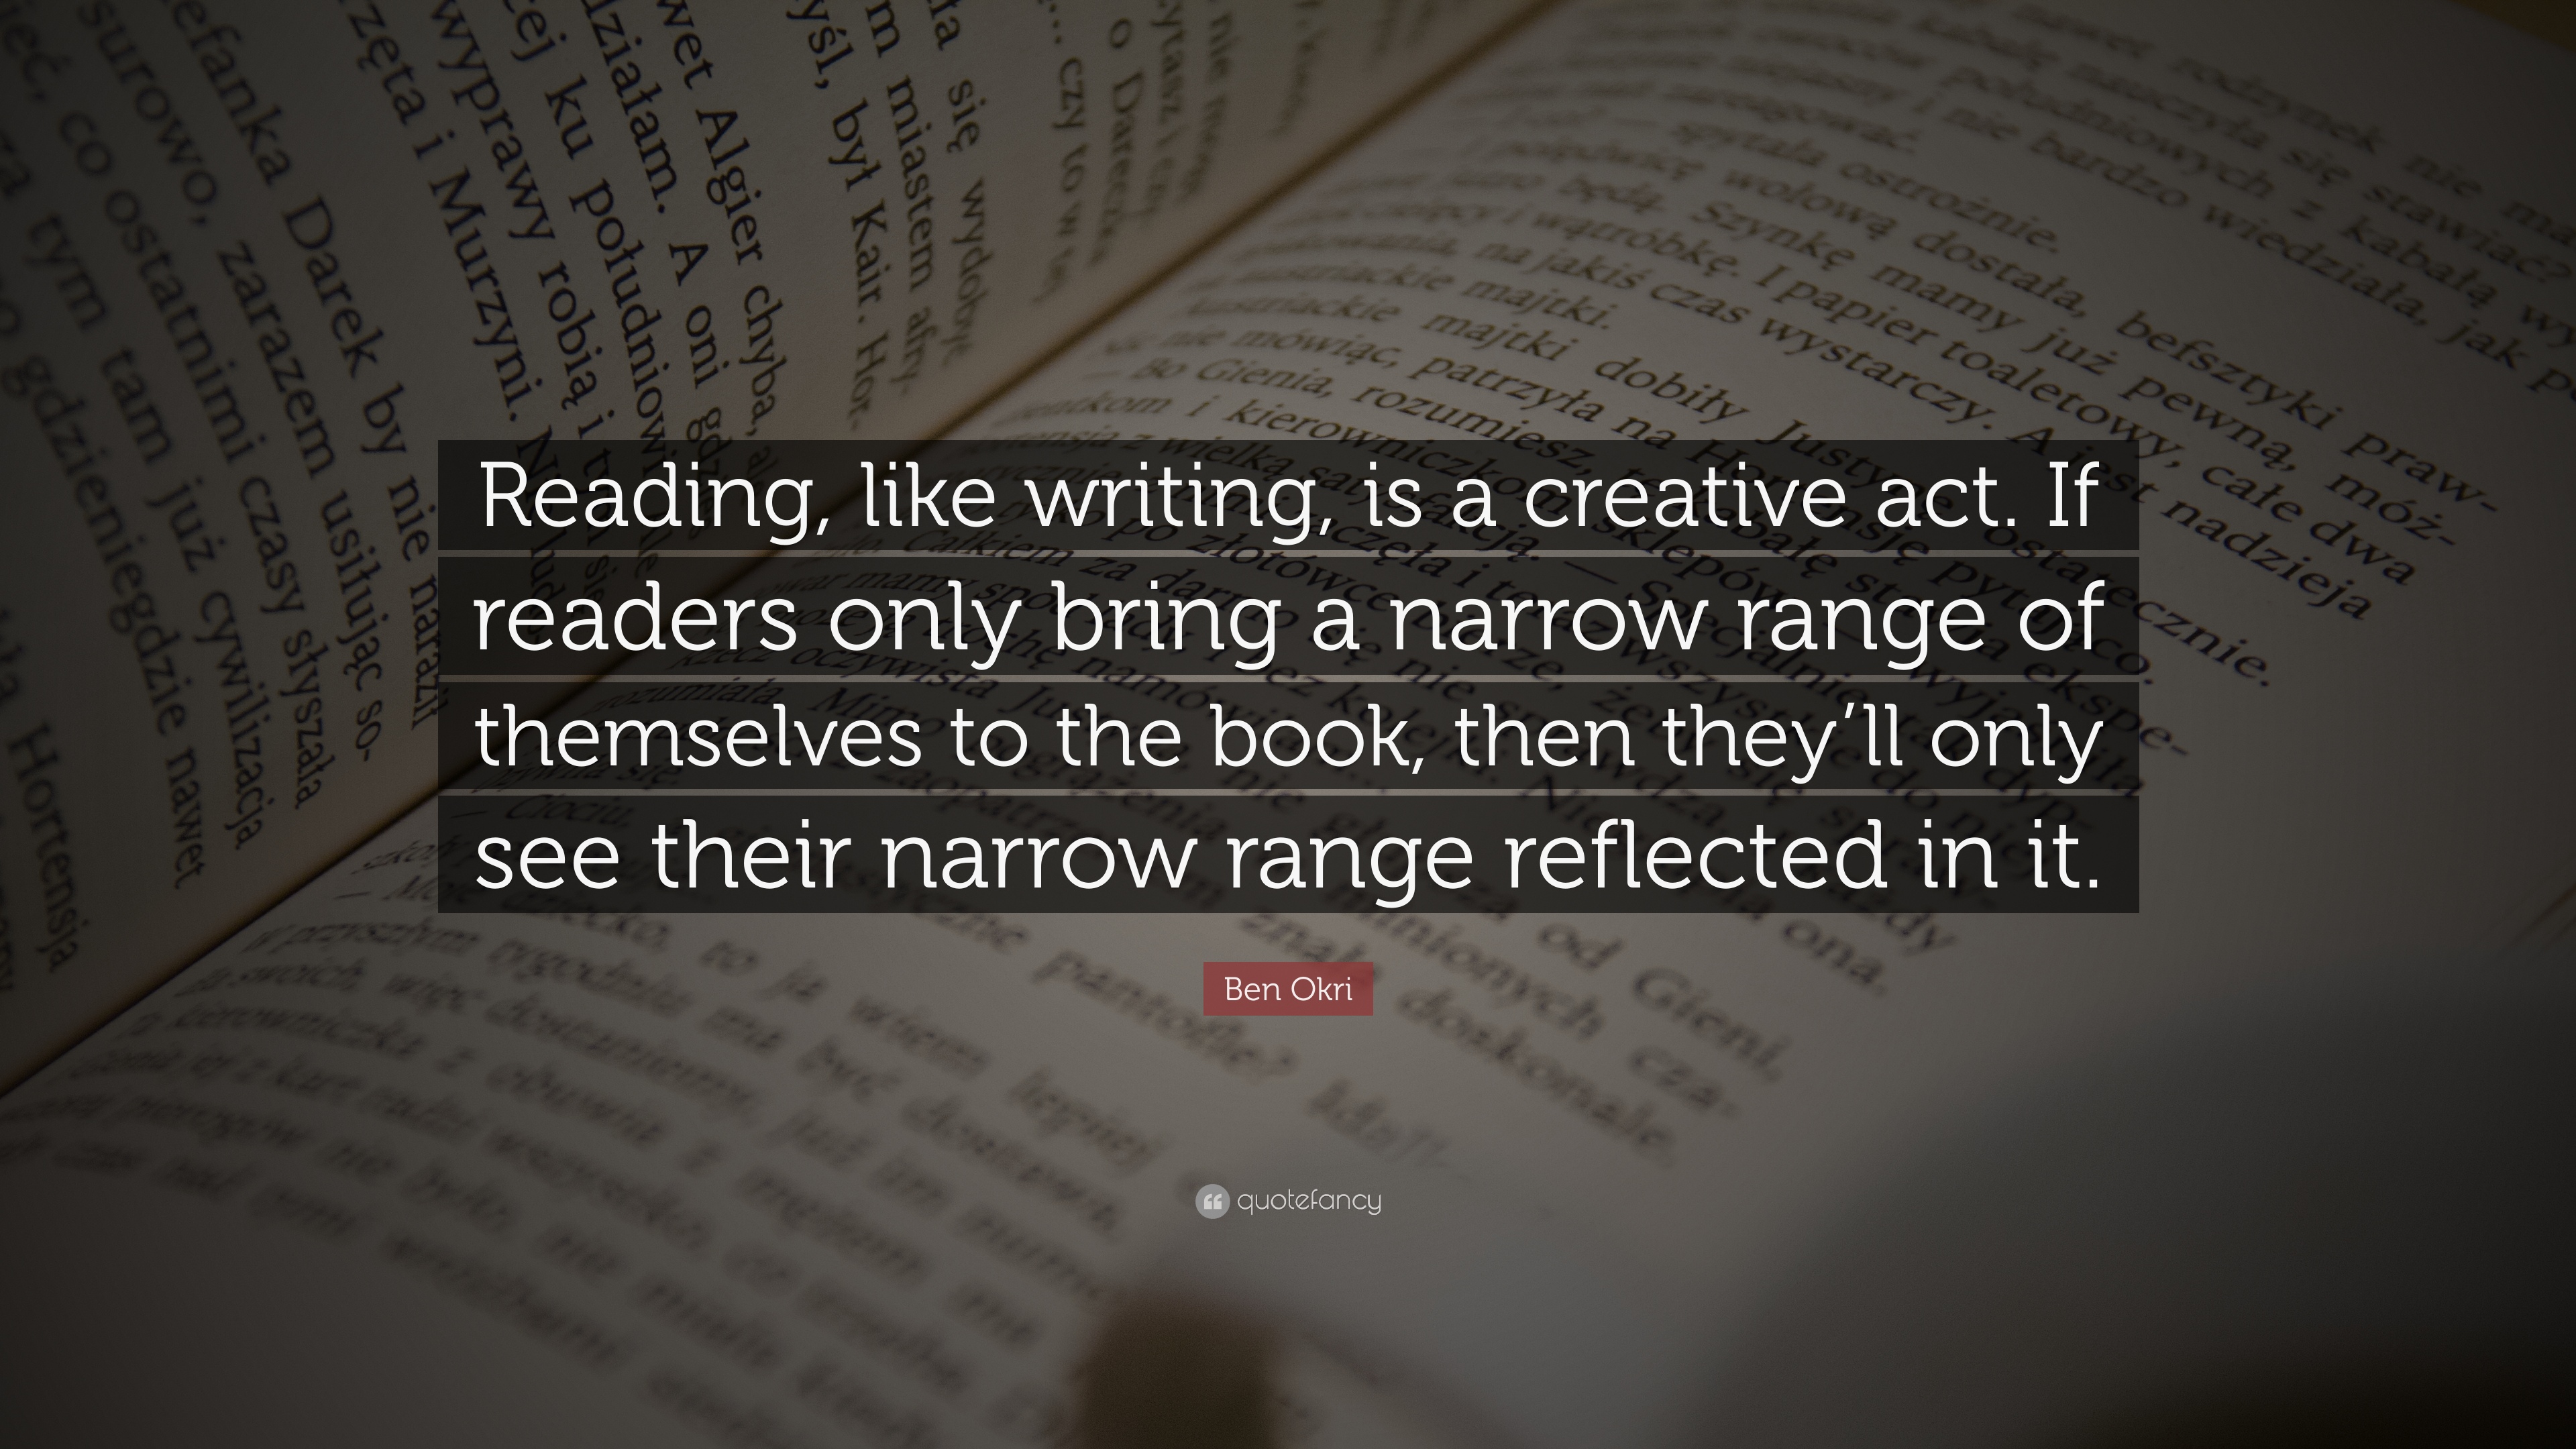 Ben Okri Quote: “Reading, like writing, is a creative act